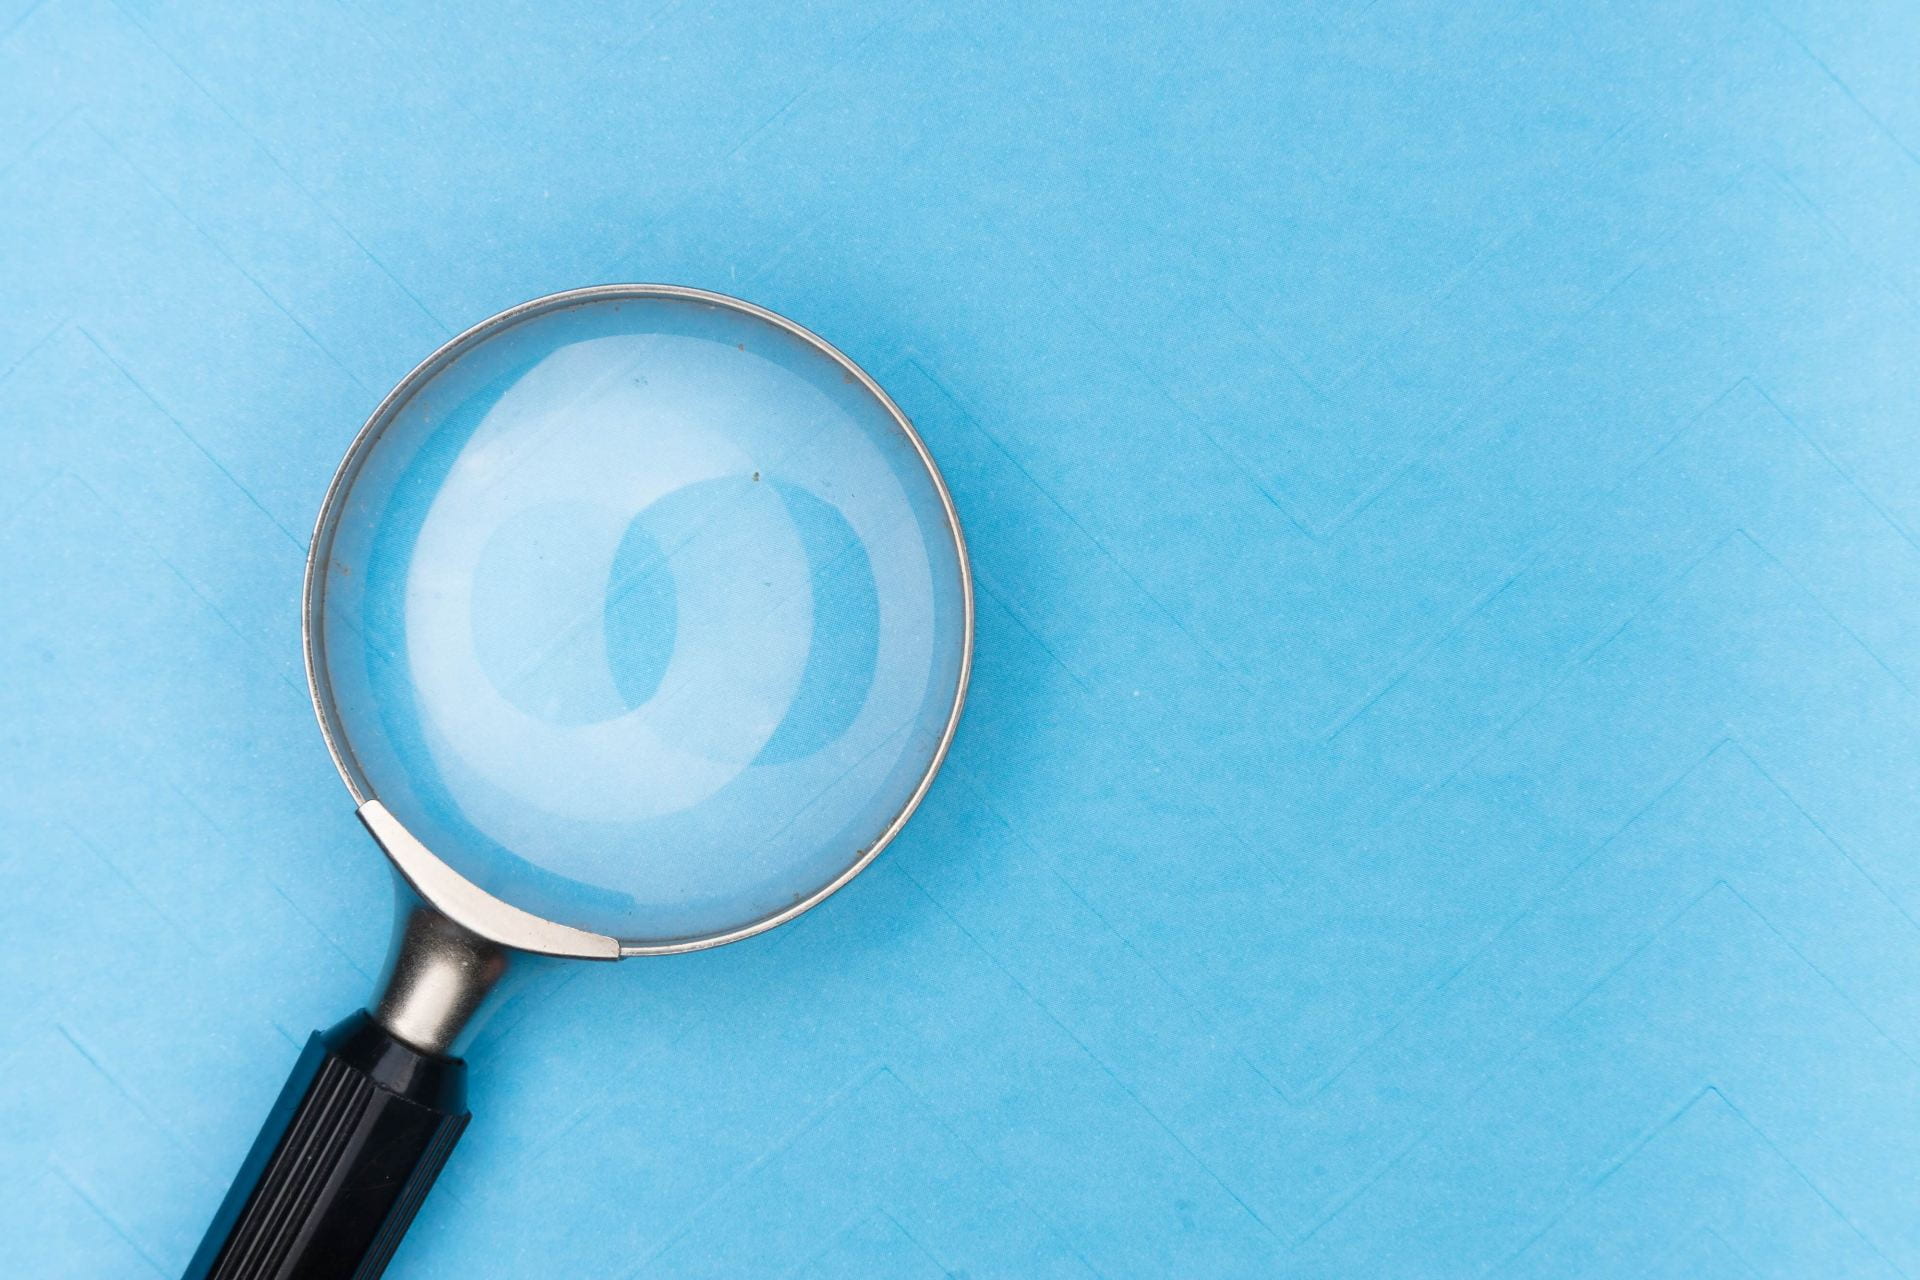 Stock image of a magnifying glass on a light blue background